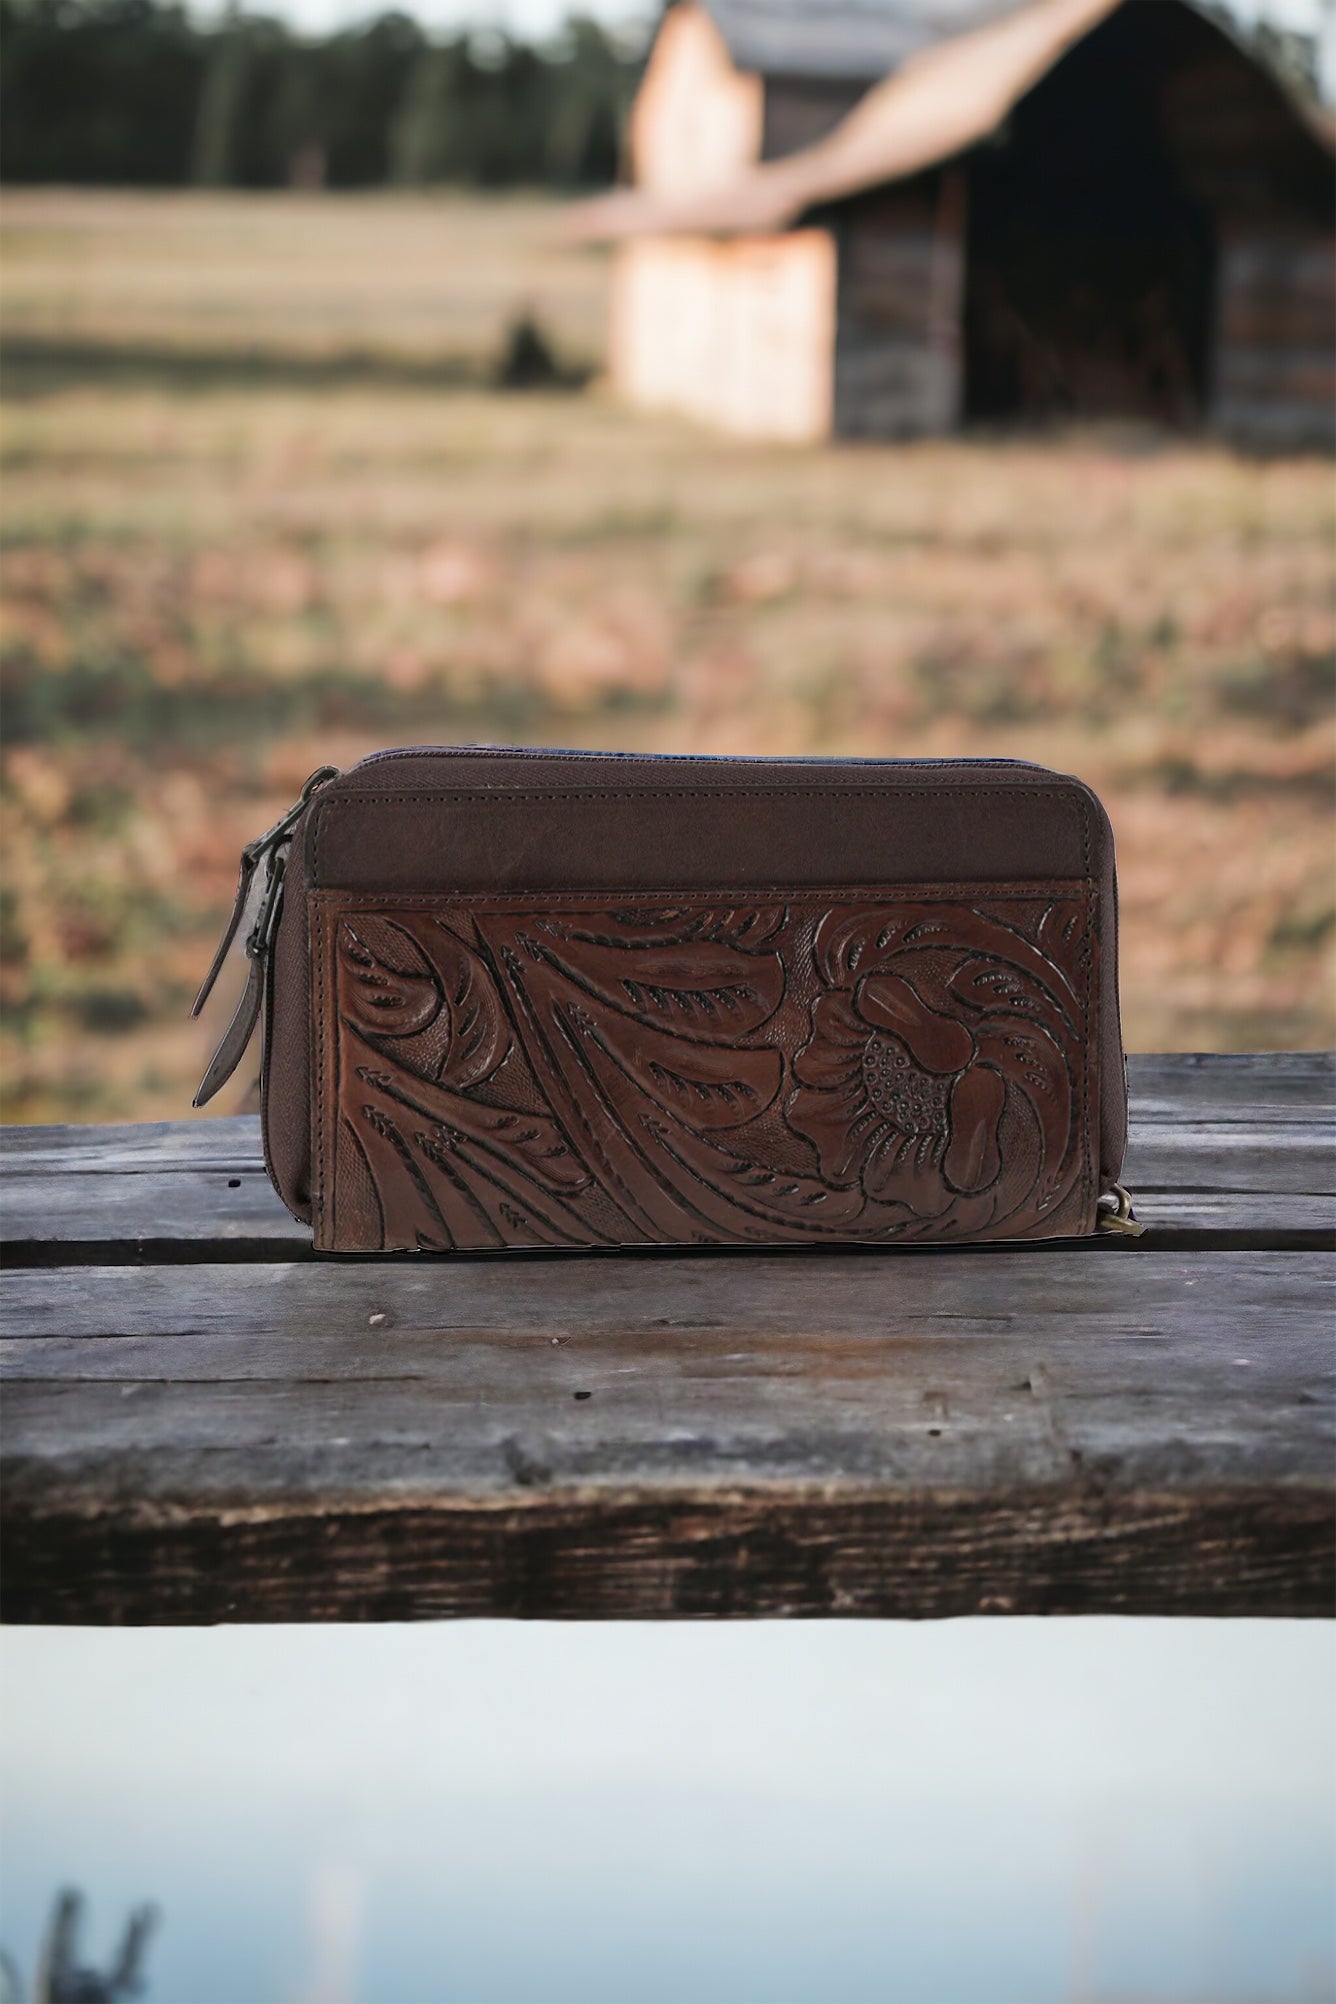 Tilly’s Tooled Leather Organizer Wallet by STS Ranchwear